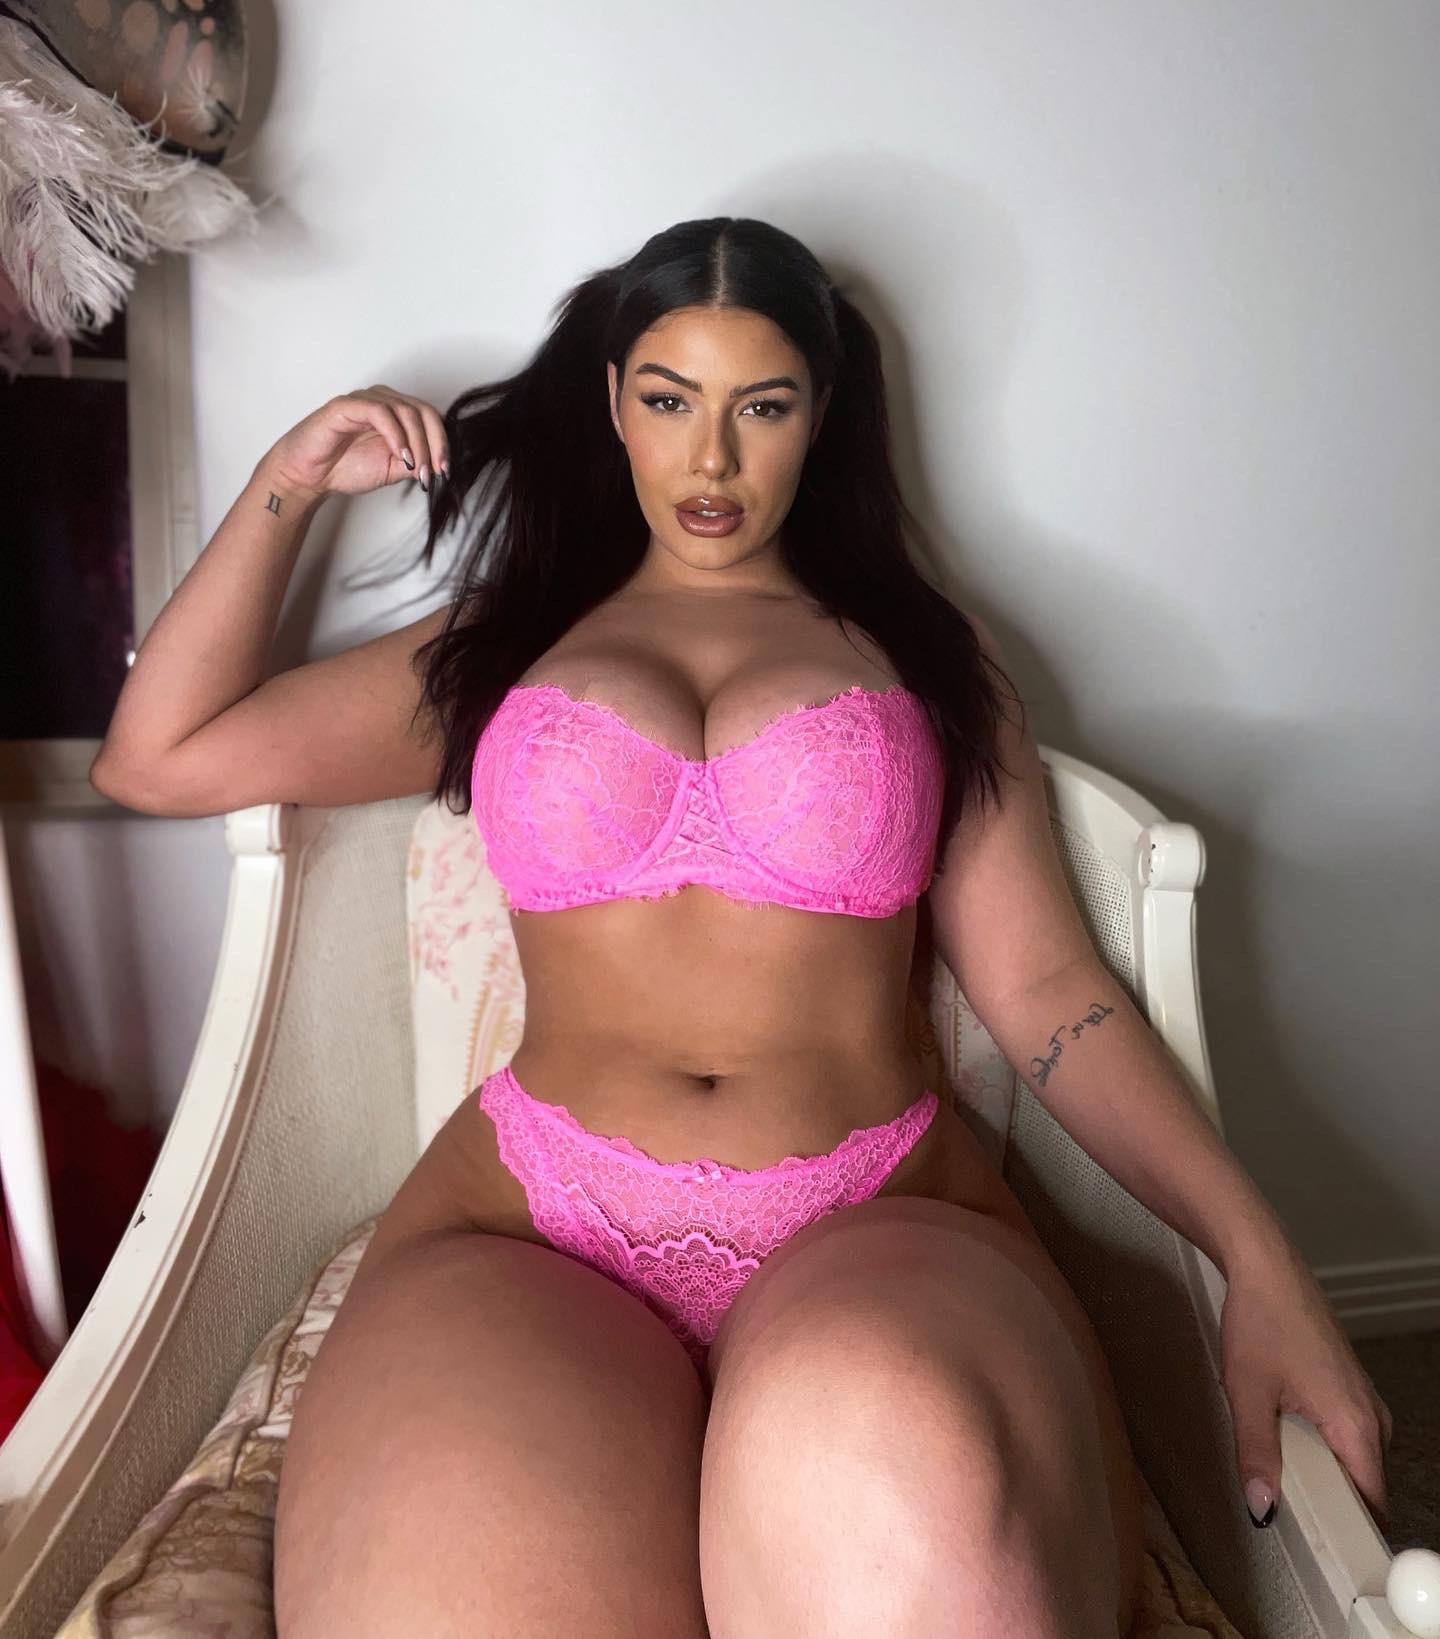 Do you follow my FREE onlyfans Link below Thick Ass